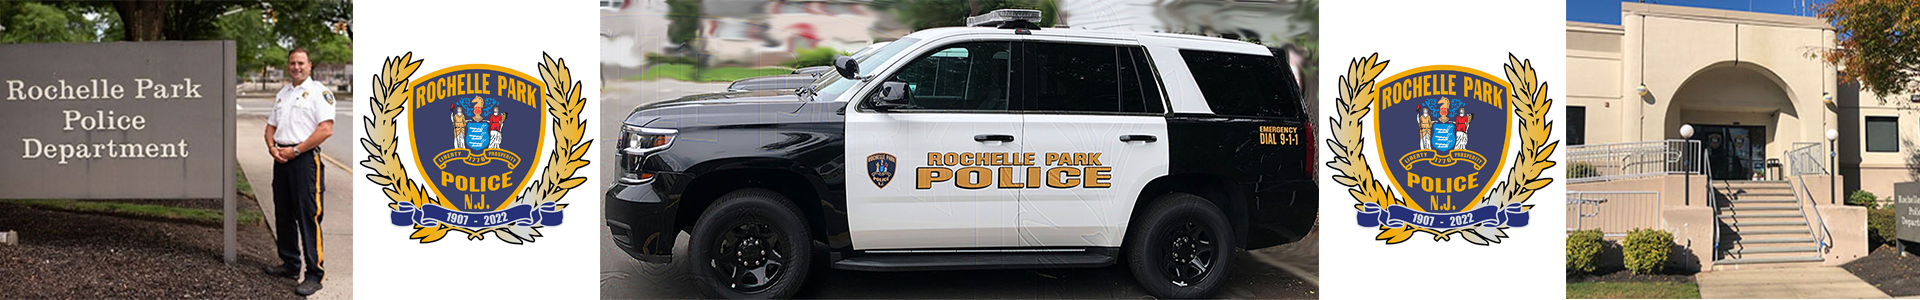 Rochelle Park DP Home Page Banner